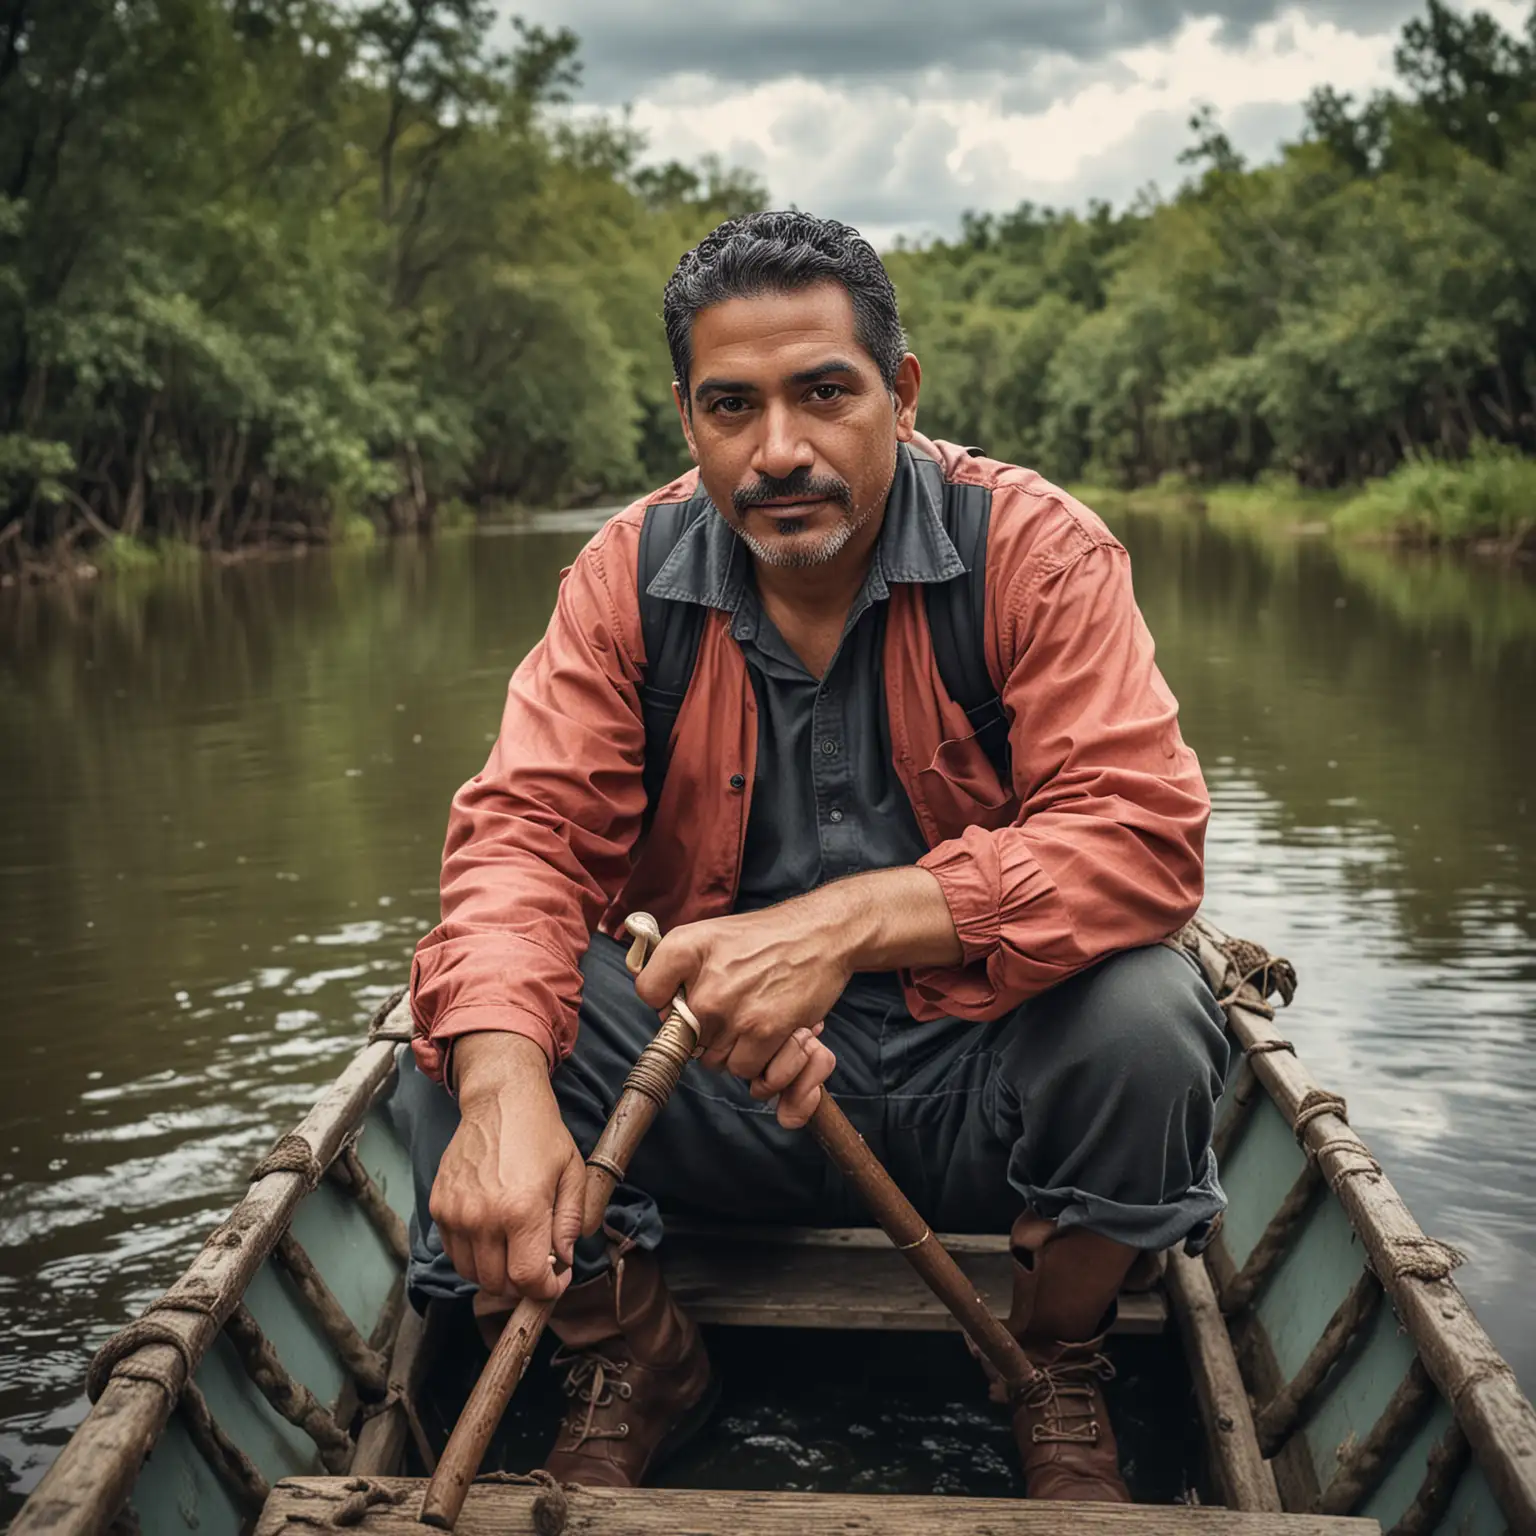 a middle age hispanic man holding a metal cane and sitting in a tiny Jon boat on a river on a cloudy day, vibrant colors